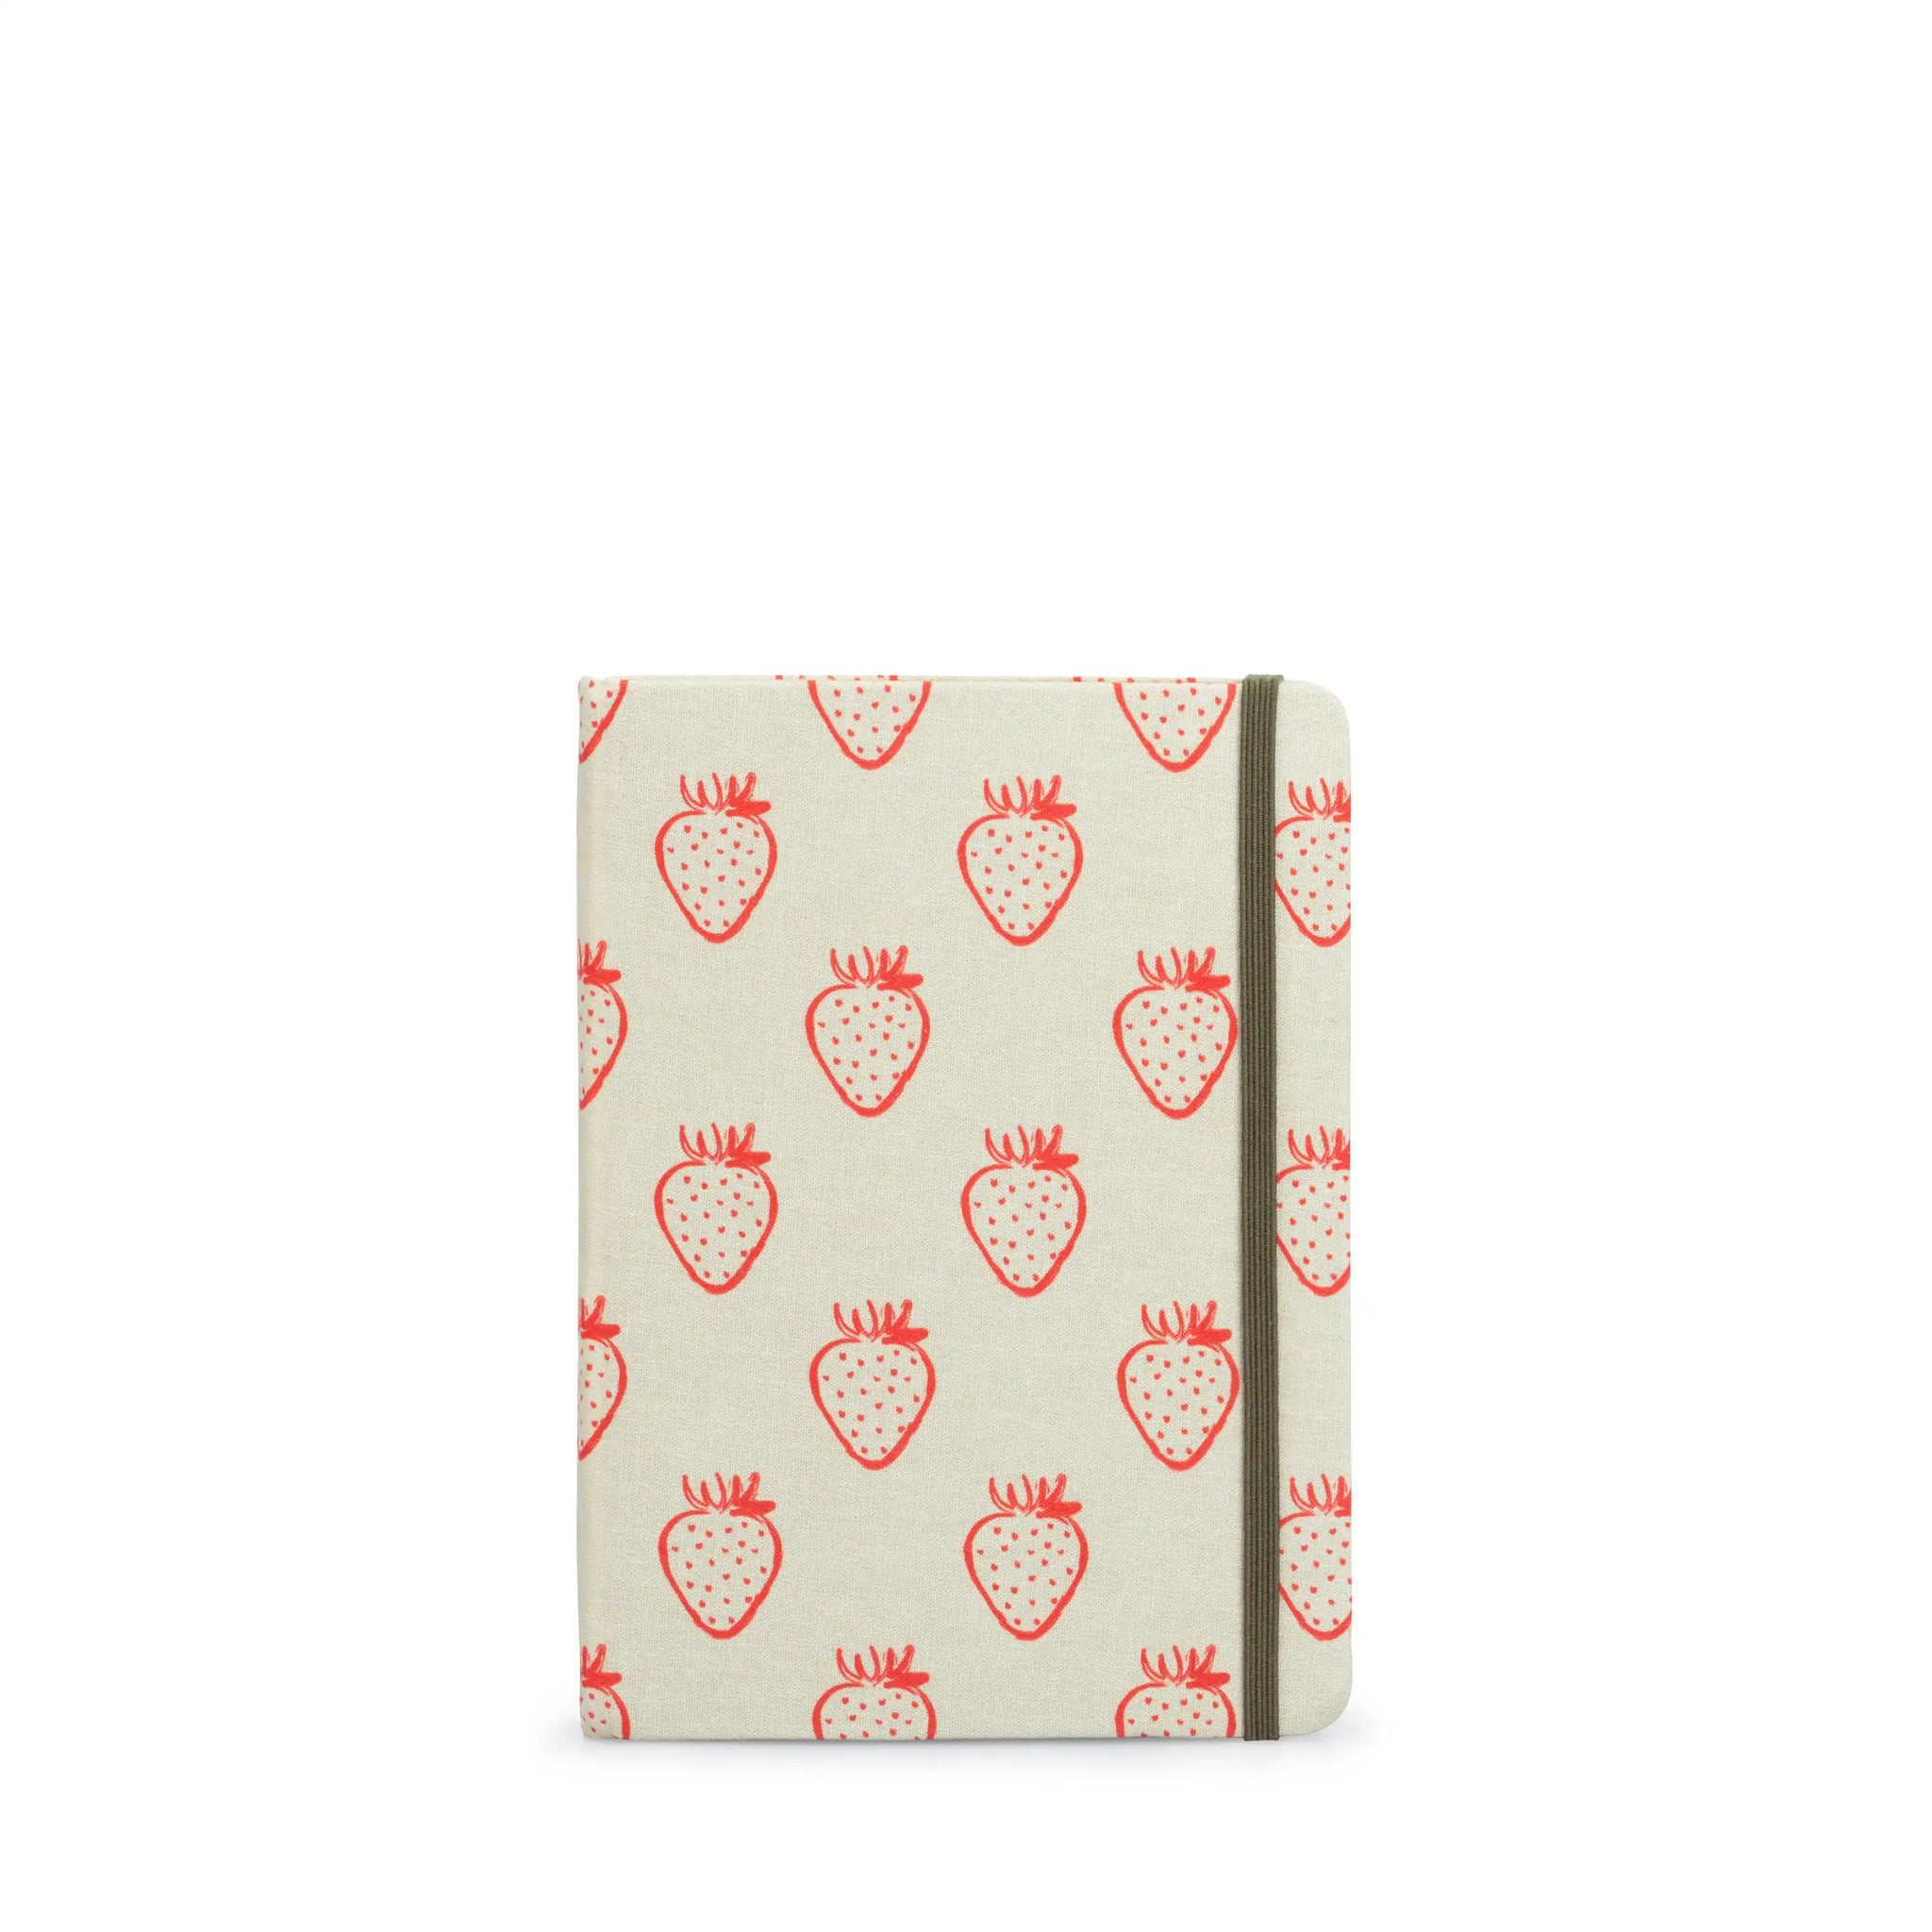 Strawberries B6 Fabric Notebook by Sophie Allport